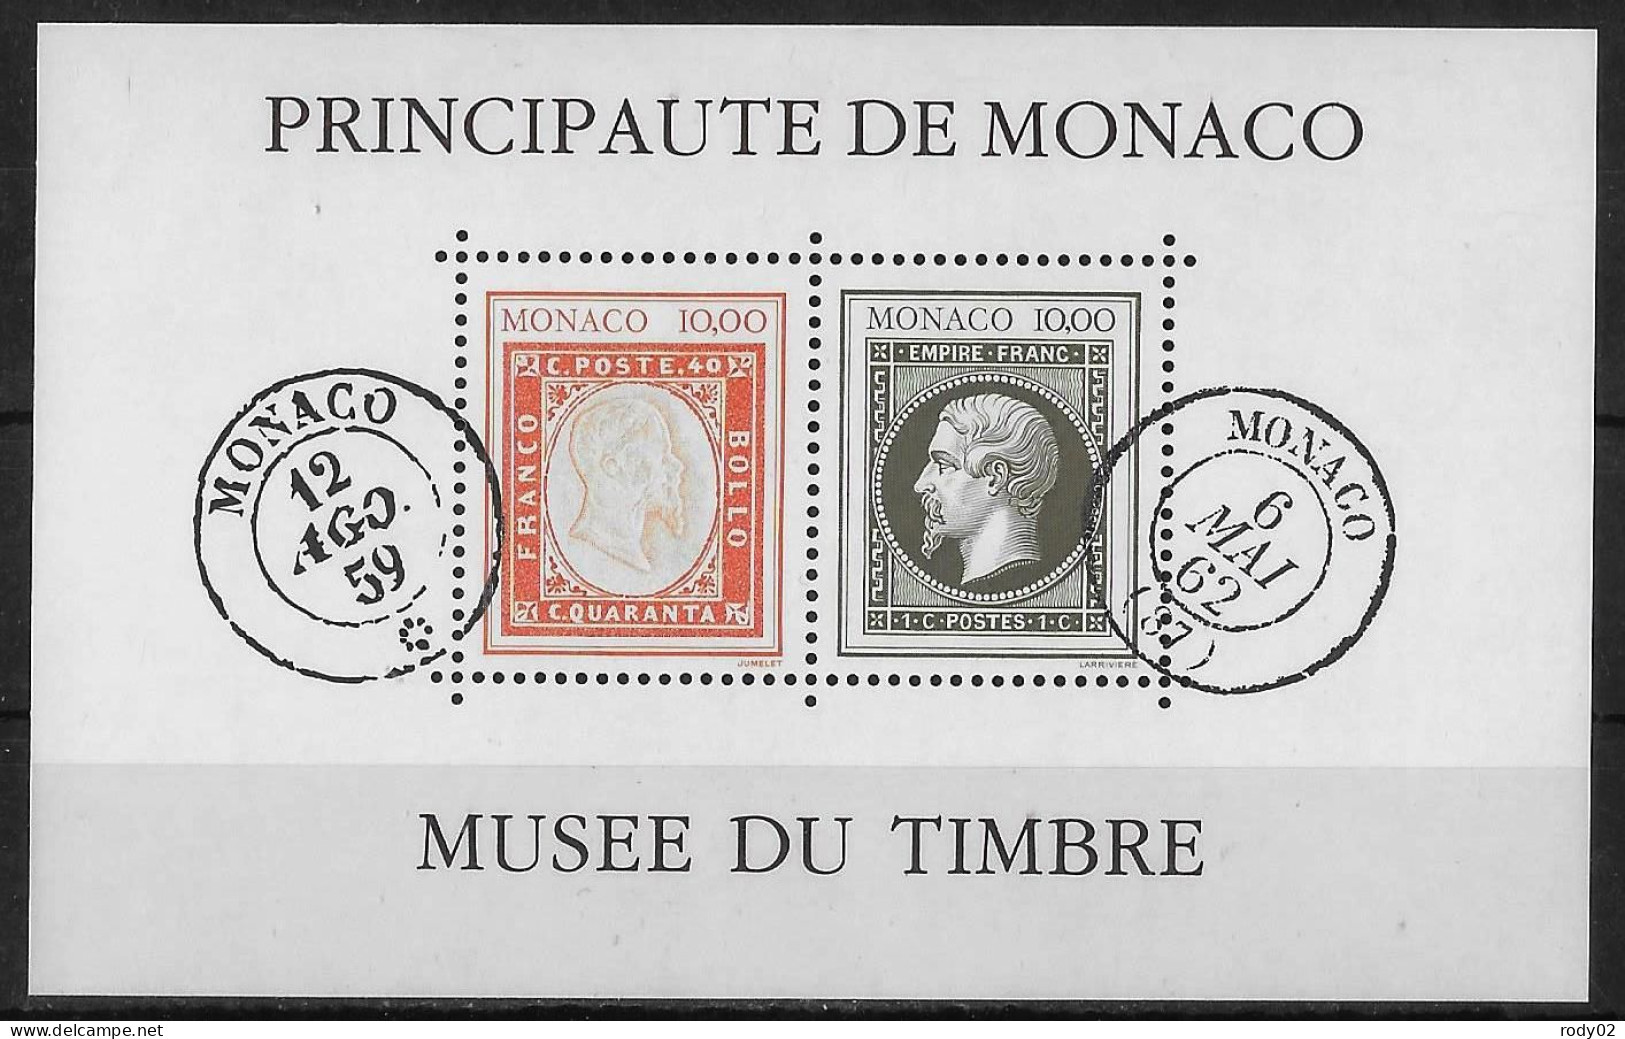 MONACO - ANNEE 1992 - CREATION DU MUSEE DU TIMBRE-POSTE - BF 58 - NEUF** MNH - Bloques